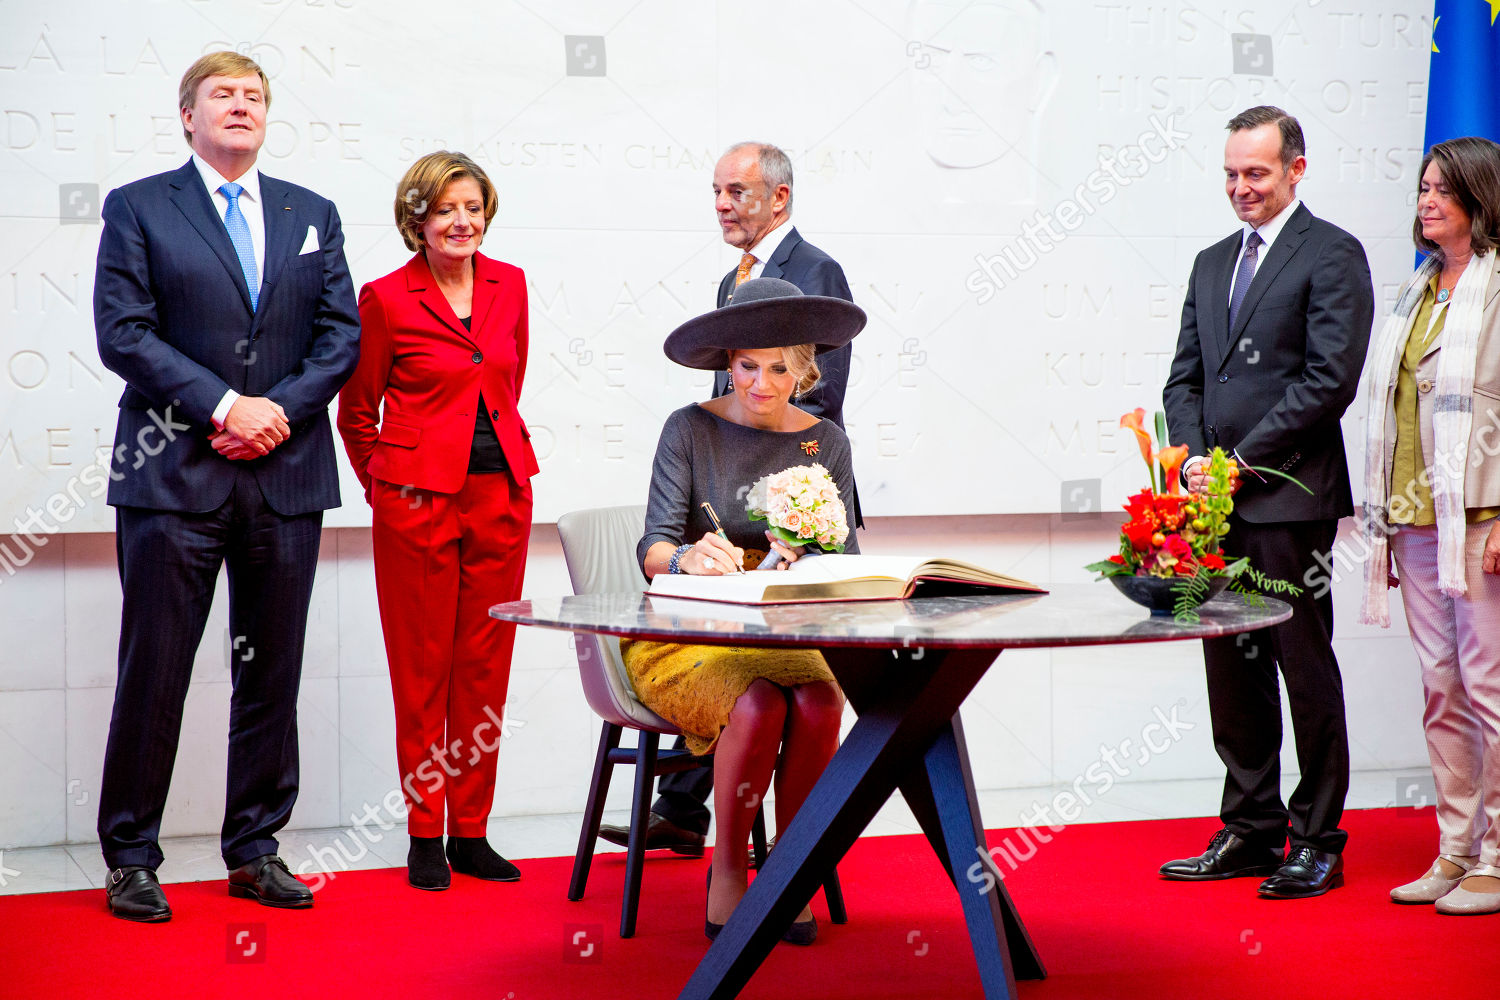 king-willem-alexander-and-queen-maxima-visit-to-germany-shutterstock-editorial-9921319p.jpg